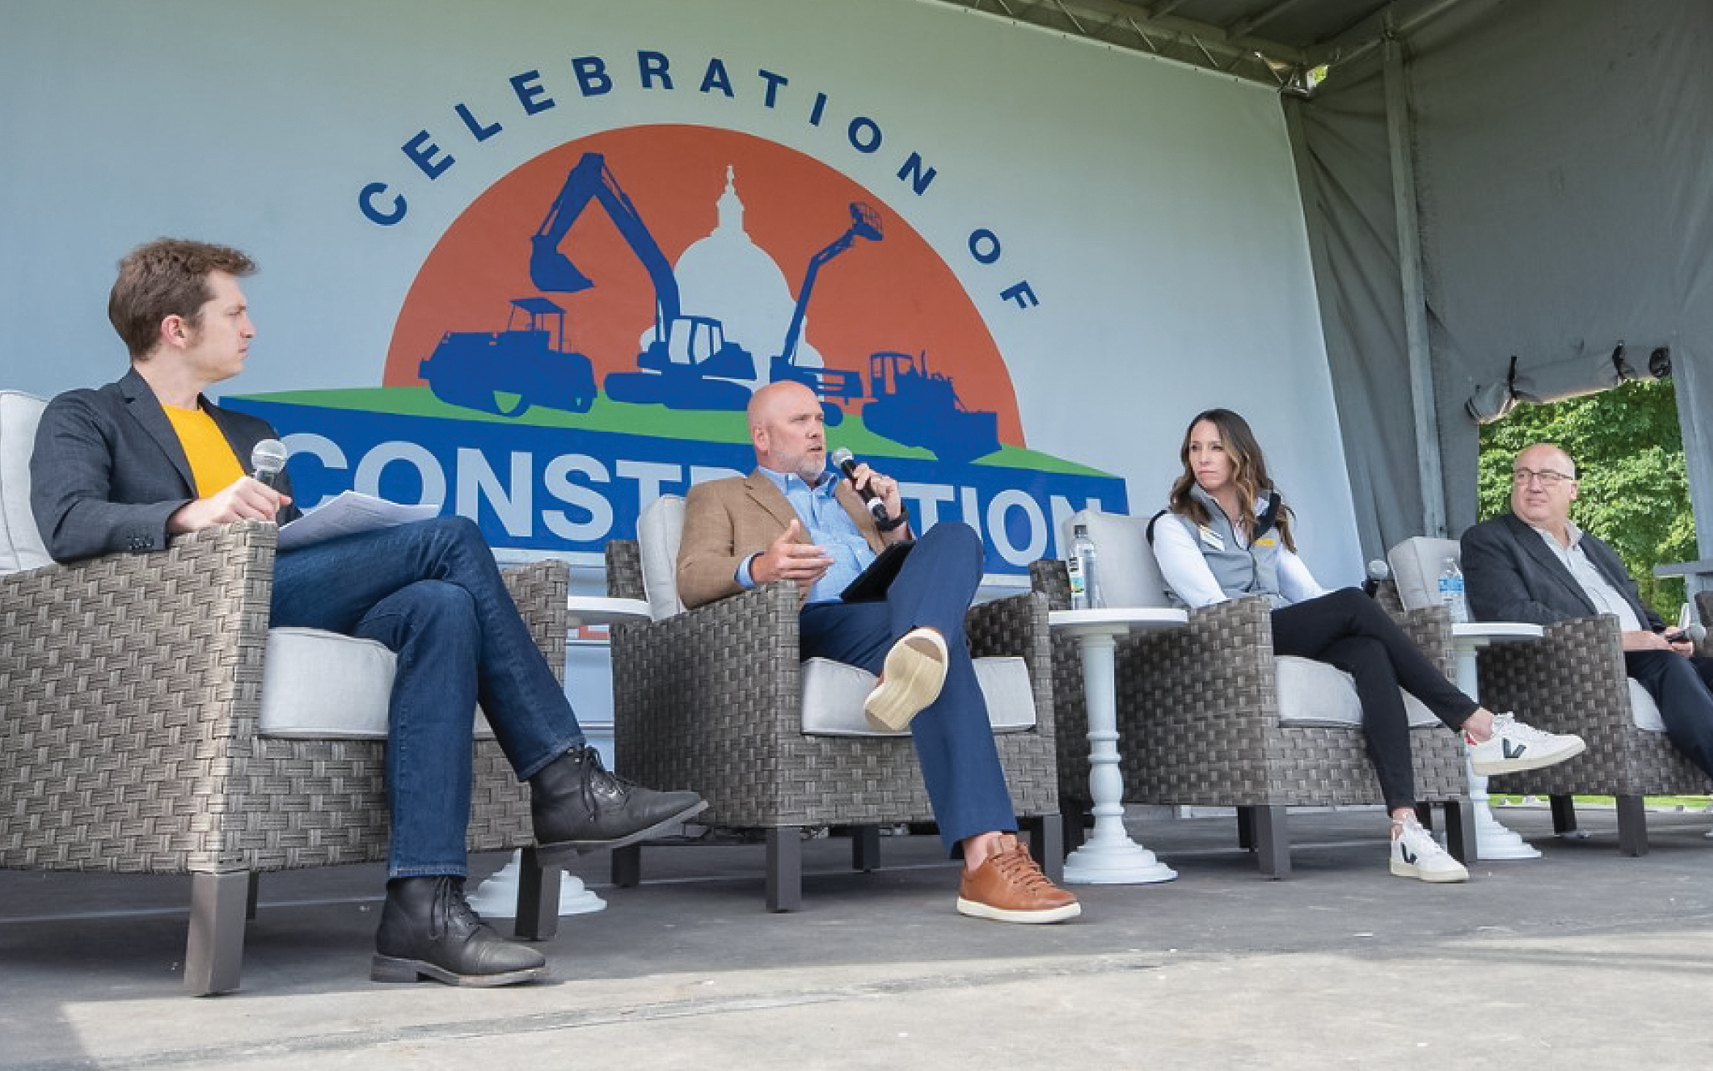 Todd Roecker, vice president of growth initiatives, speaks during a panel presentation at the Celebration of Construction.